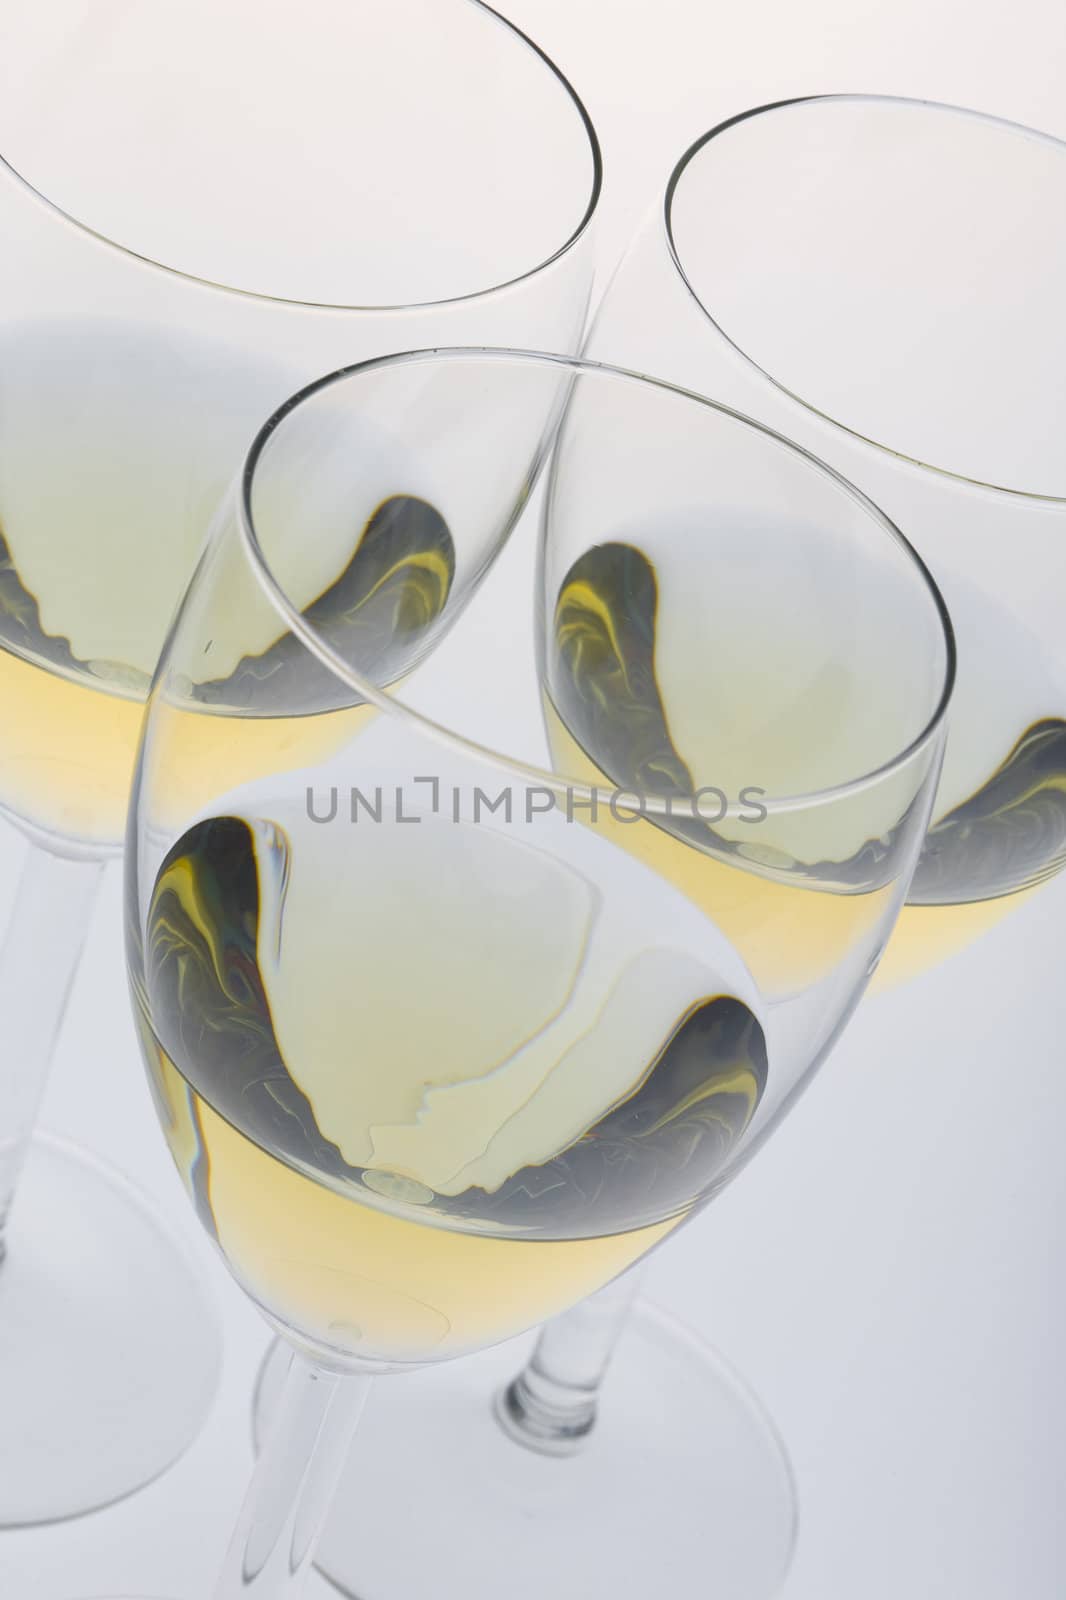 wineglasses with white wine